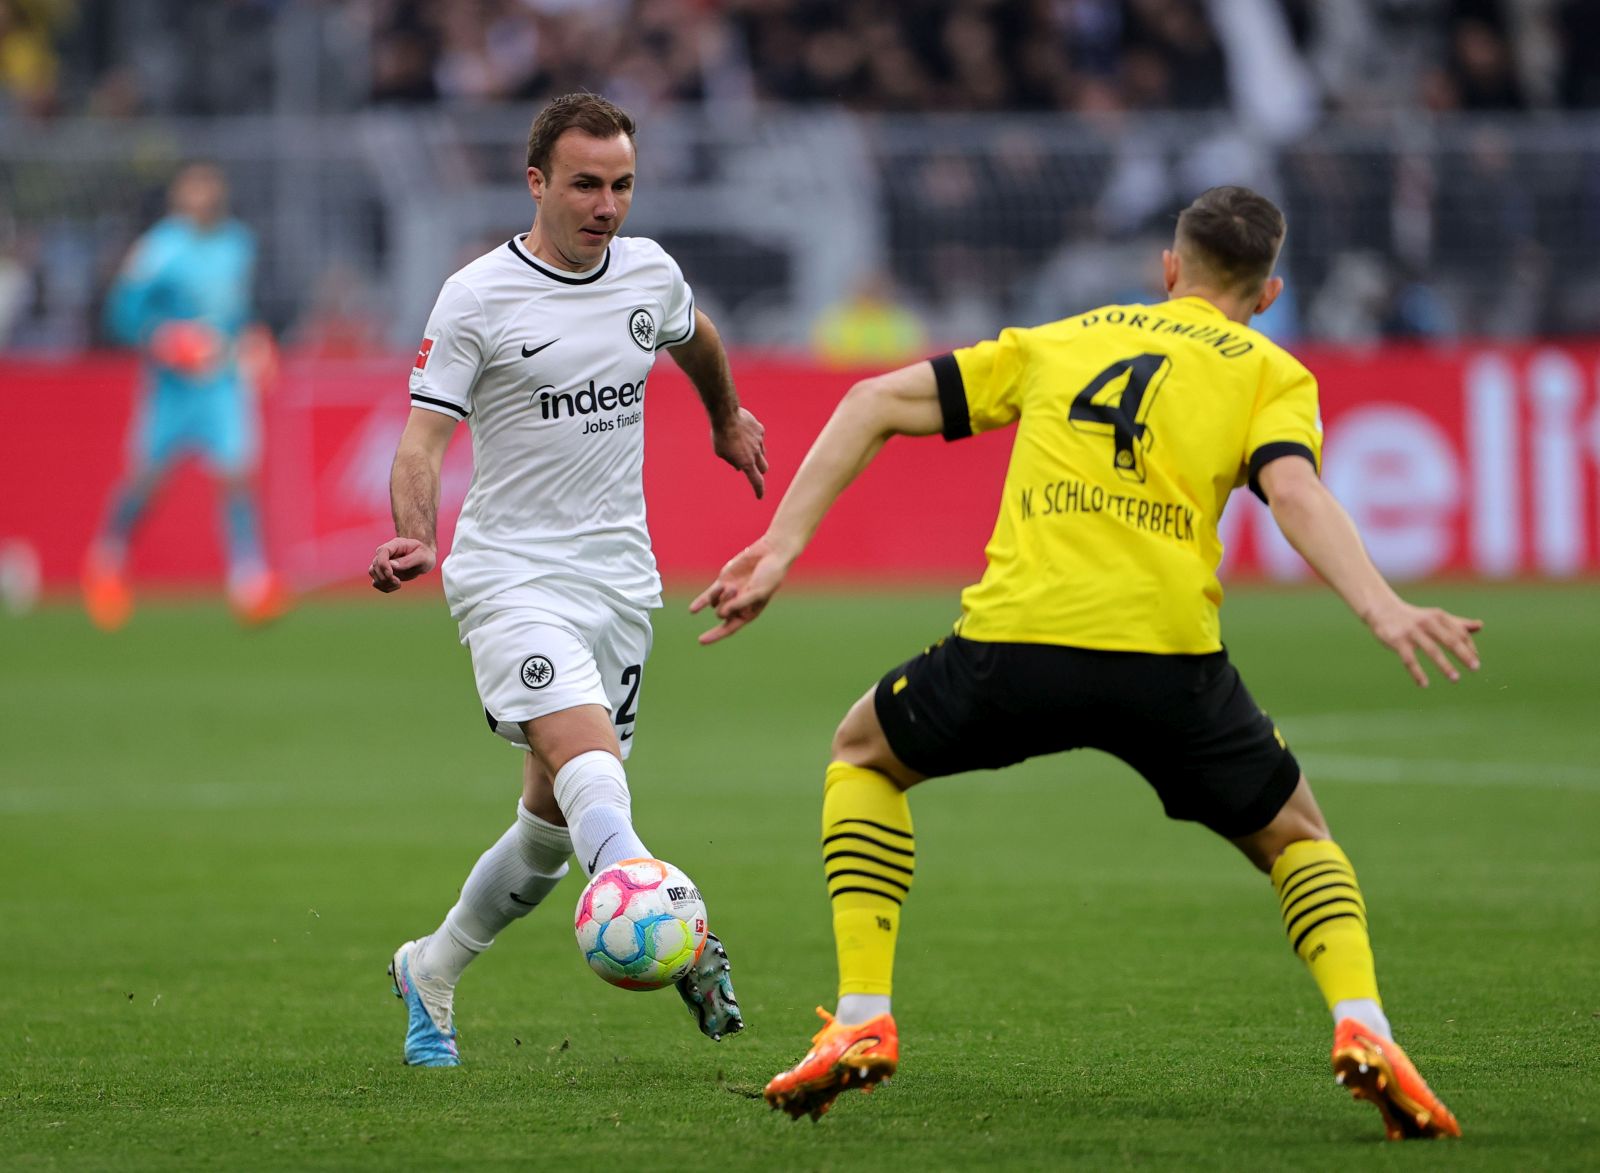 epa10586144 Frankfurt's Mario Goetze (L) in action against Dortmund's Nico Schlotterbeck (R) during the German Bundesliga soccer match between Borussia Dortmund and Eintracht Frankfurt in Dortmund, Germany, 22 April 2023.  EPA/FRIEDEMANN VOGEL CONDITIONS - ATTENTION: The DFL regulations prohibit any use of photographs as image sequences and/or quasi-video.